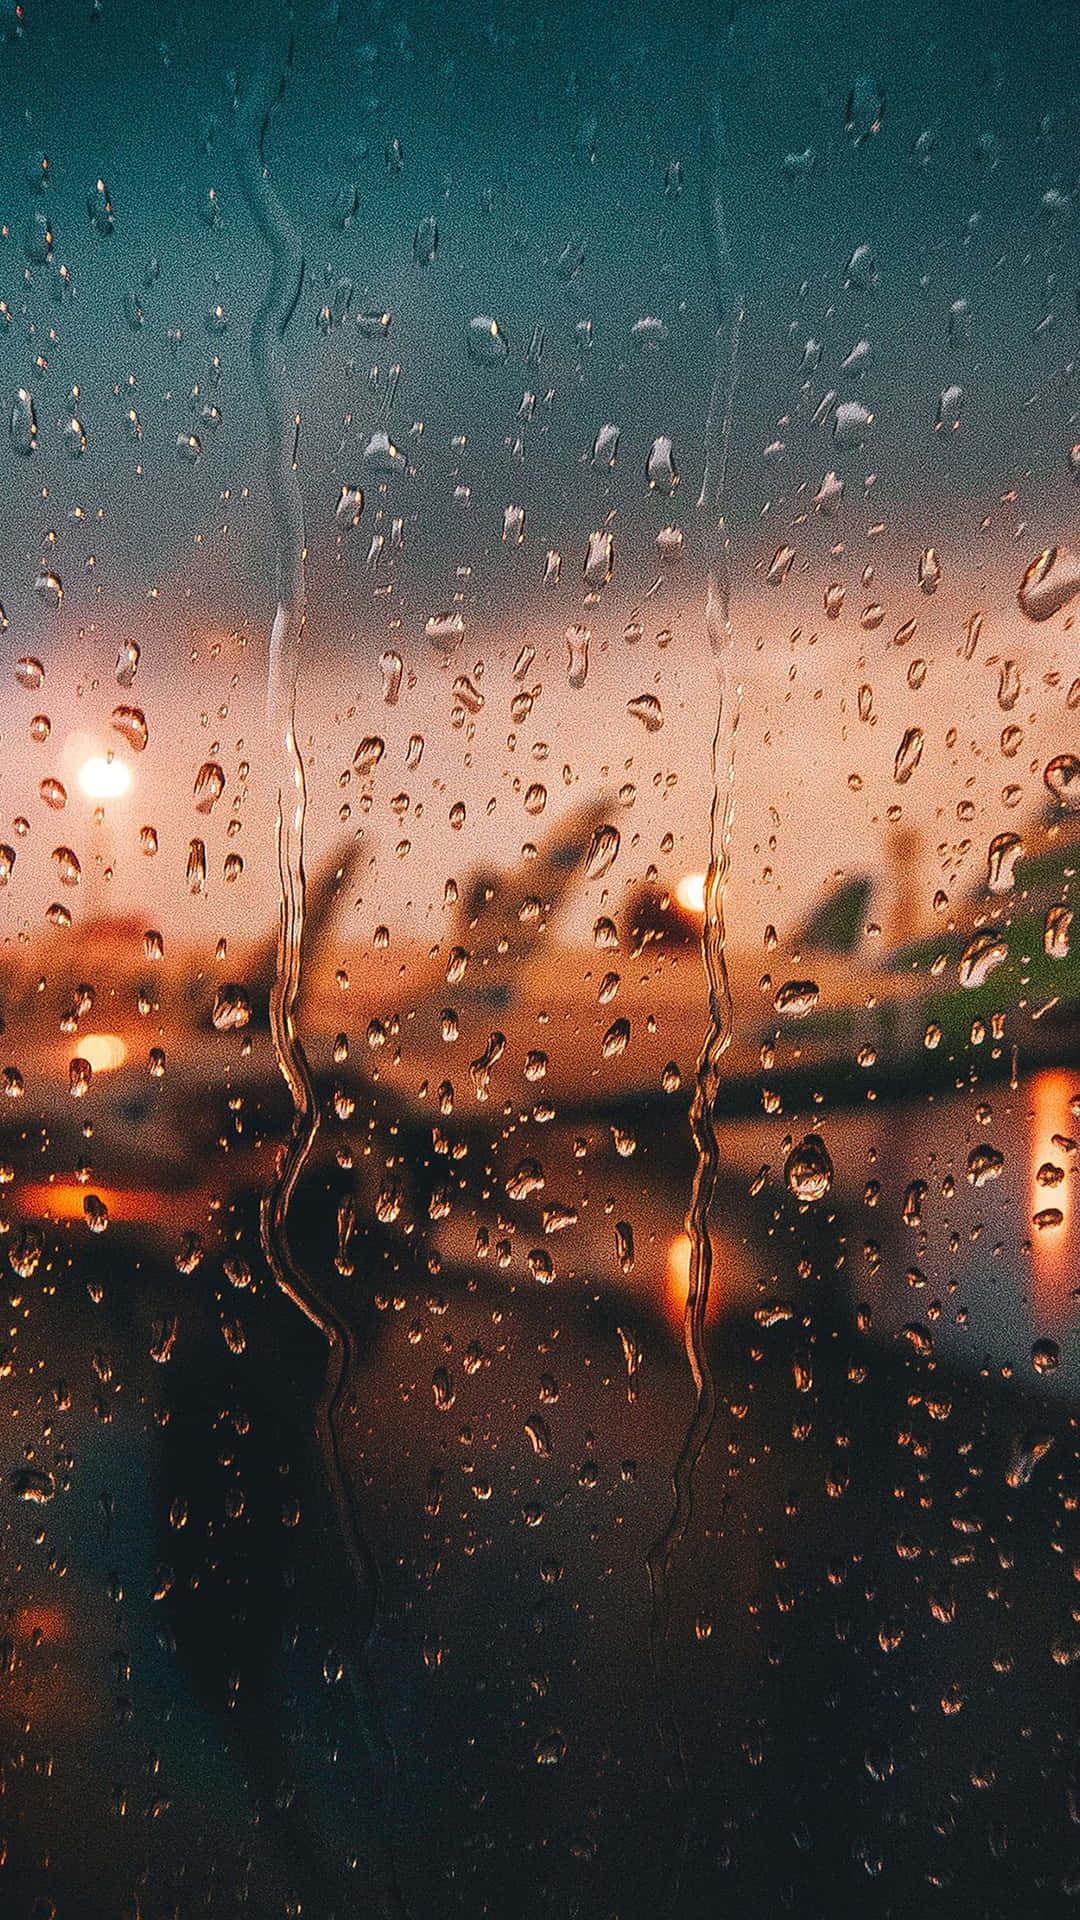 “Find solace in the sound of rain.” Wallpaper